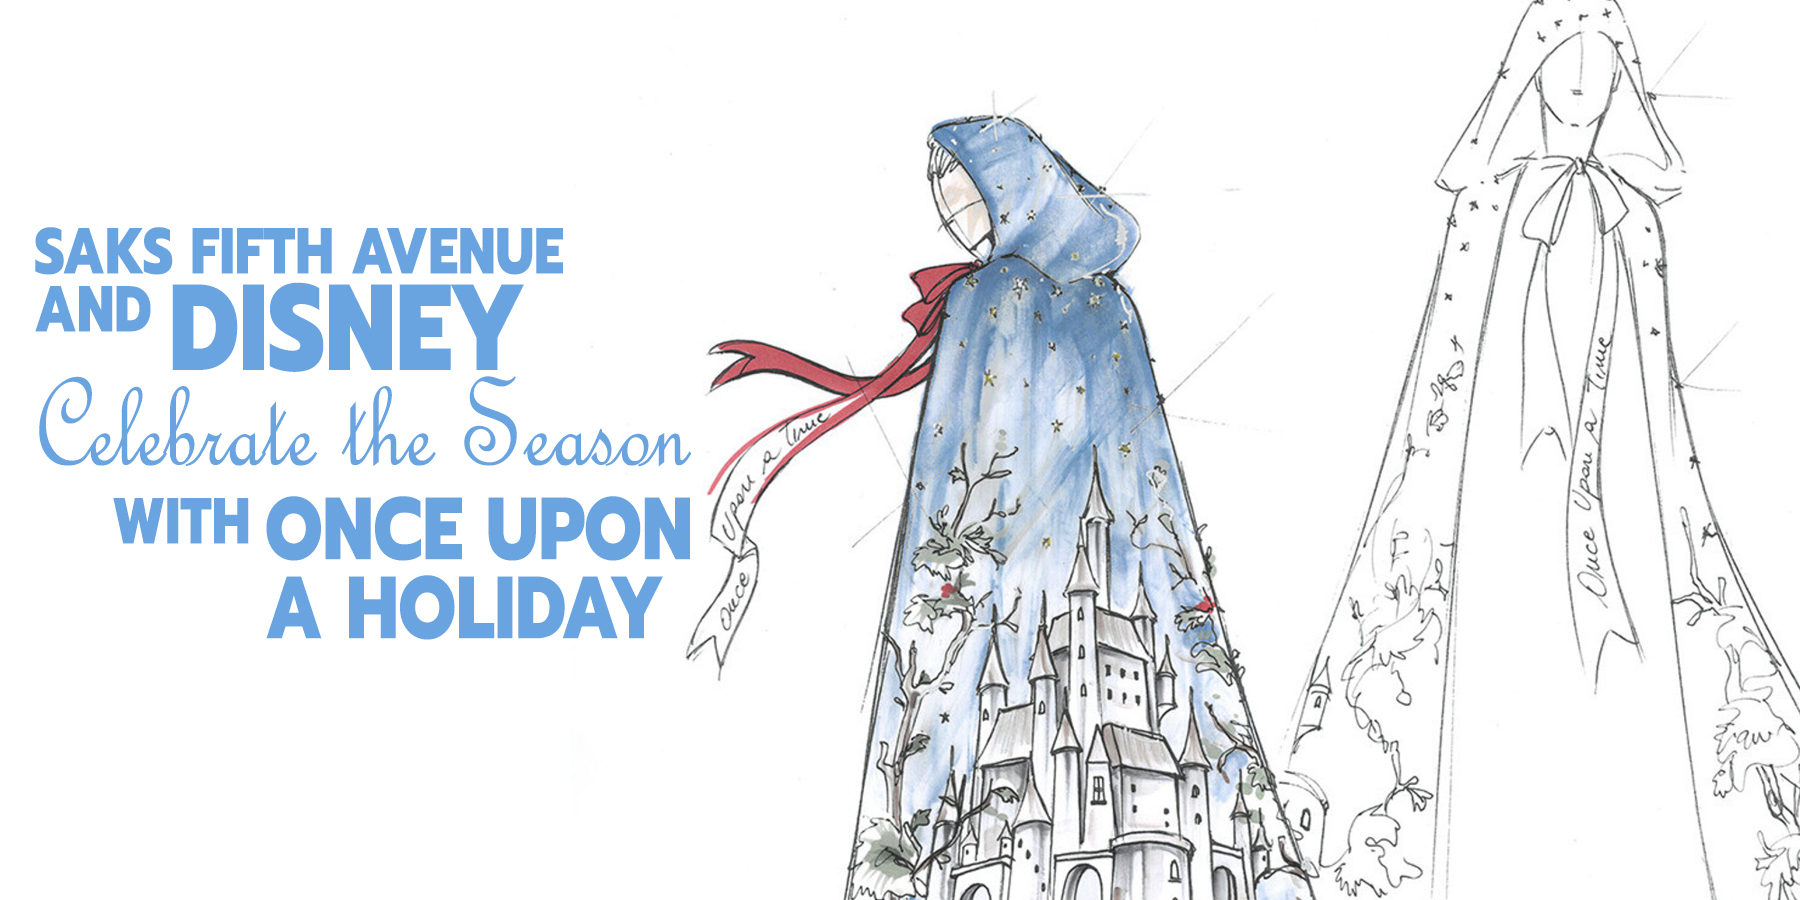 Collaborating for the first time on a holiday experience, SAKS FIFTH AVENUE and DISNEY CELEBRATE THE SEASON with ONCE UPON A HOLIDAY